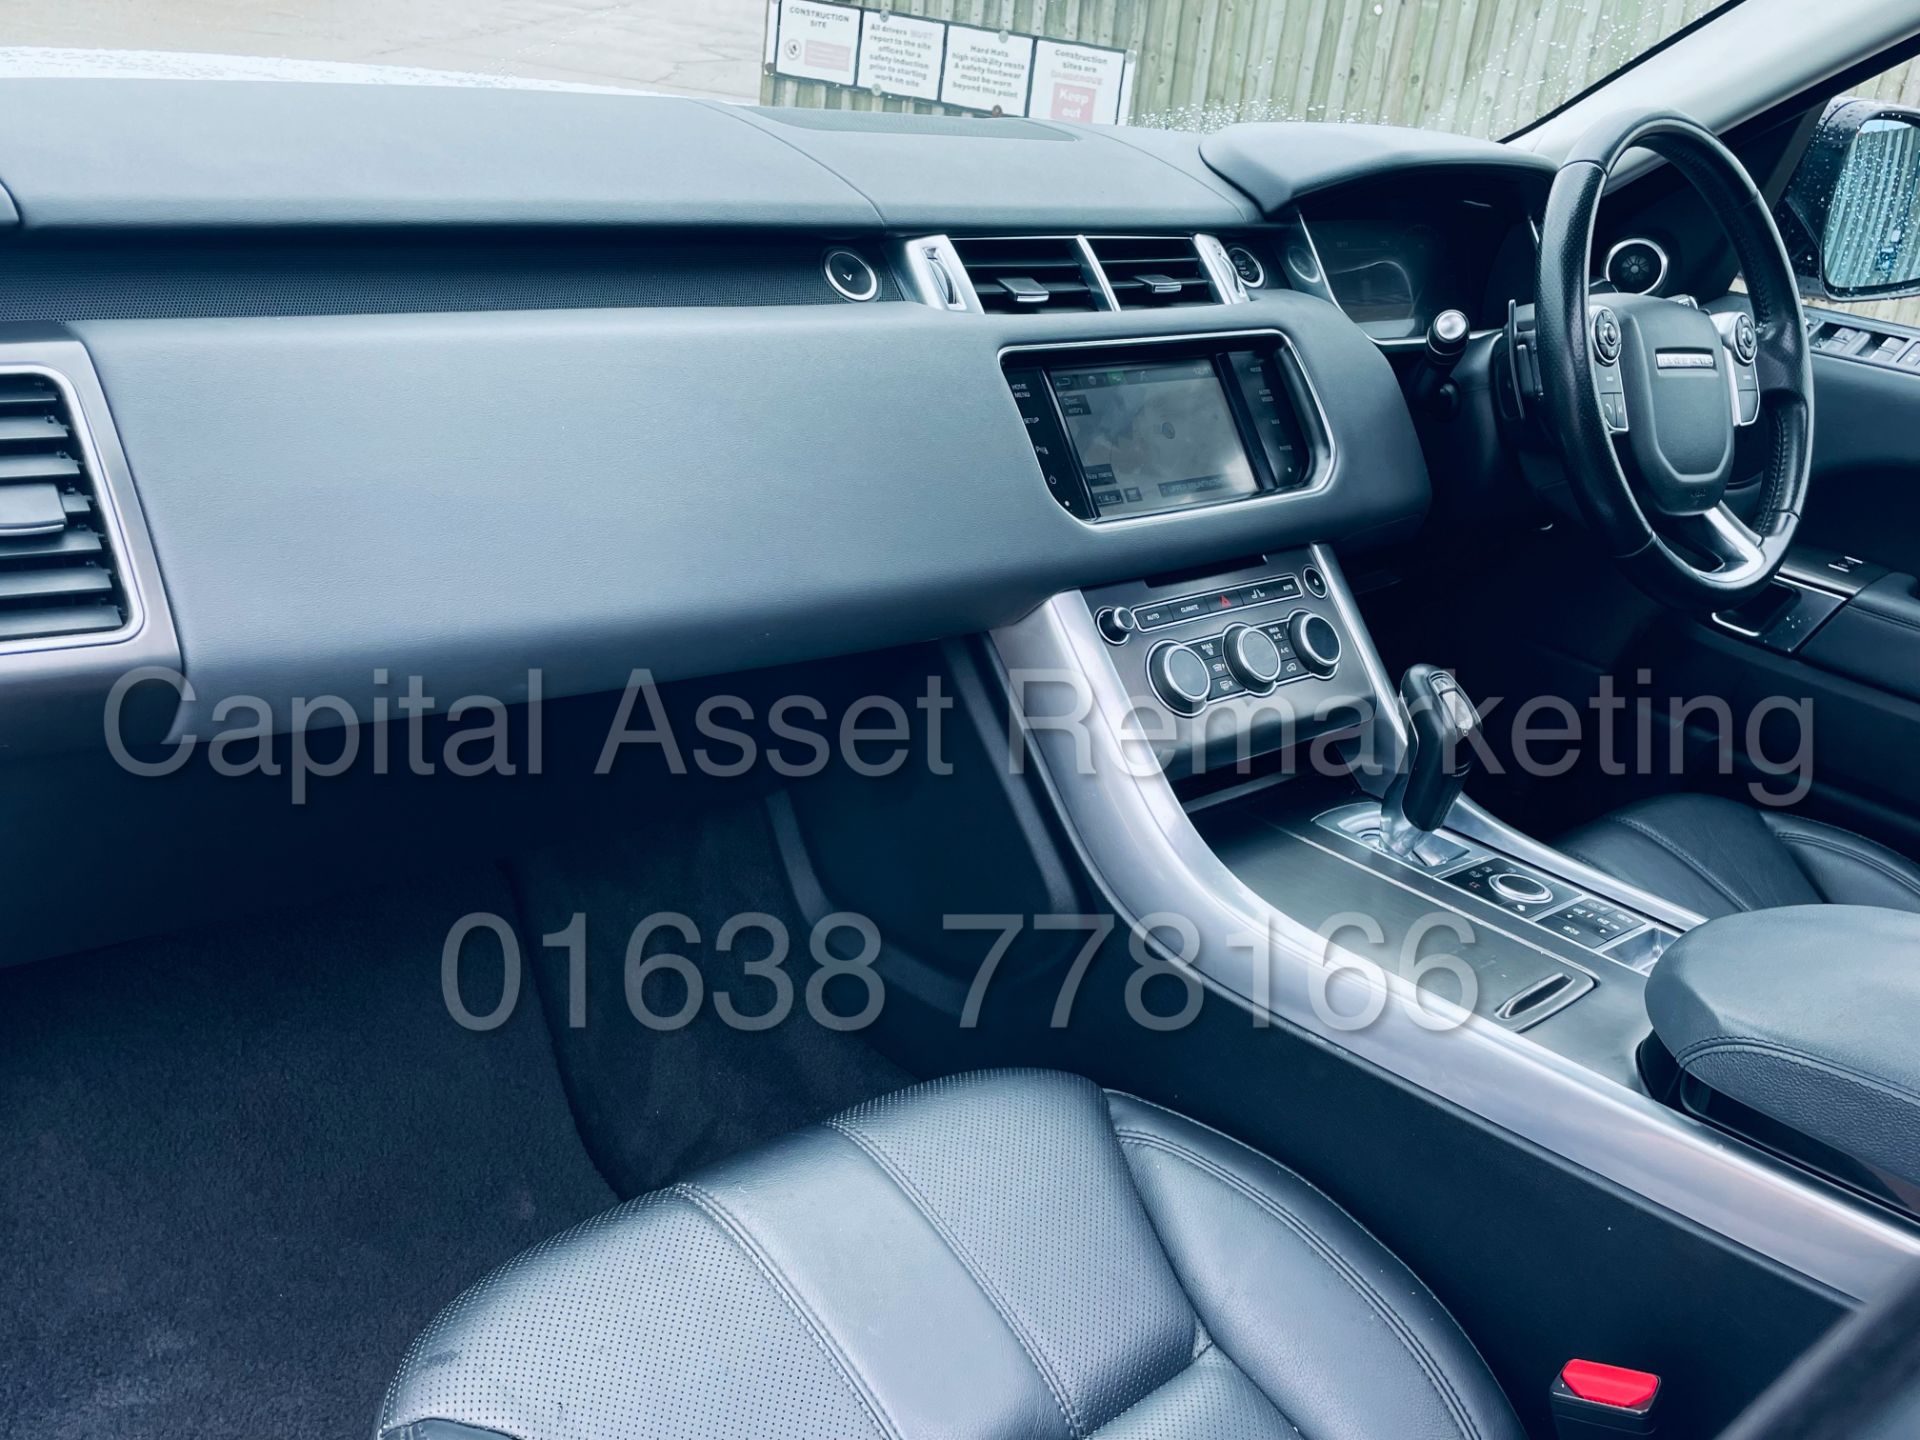 On Sale RANGE ROVER SPORT *SPECIAL EDITION* (2014) '3.0 TDV6 - AUTO' *SAT NAV & PAN ROOF* (TOP SPEC) - Image 24 of 54